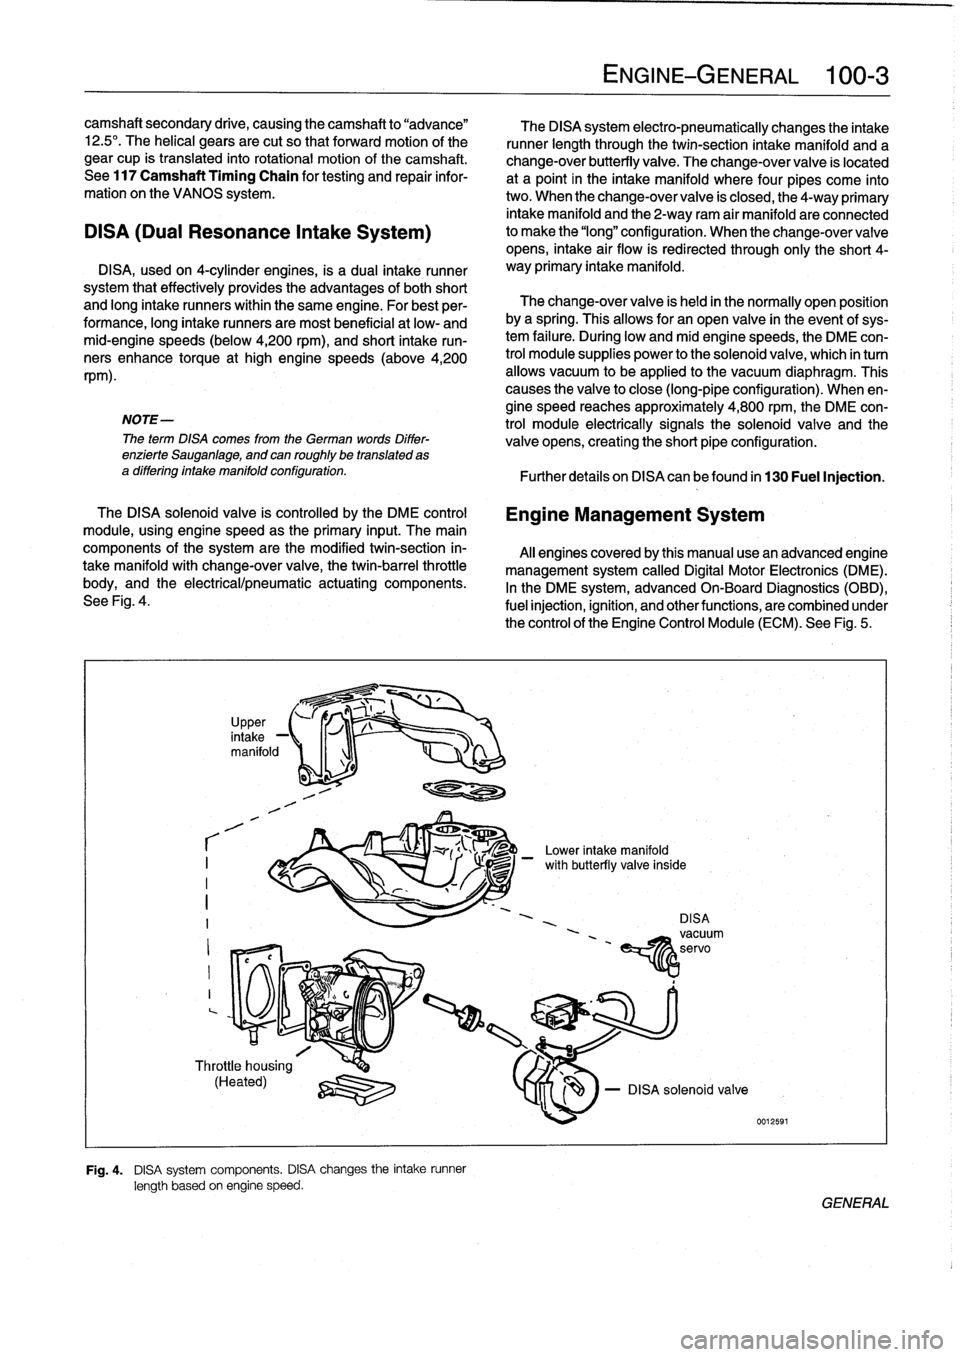 BMW 323i 1995 E36 Workshop Manual camshaft
secondary
drive,
causing
thecamshaft
to
"advance"

12
.5°
.
The
helical
gears
are
cut
so
that
forward
motion
of
the

gear
cup
is
transiated
into
rotational
motion
of
the
camshaft
.

See
117
